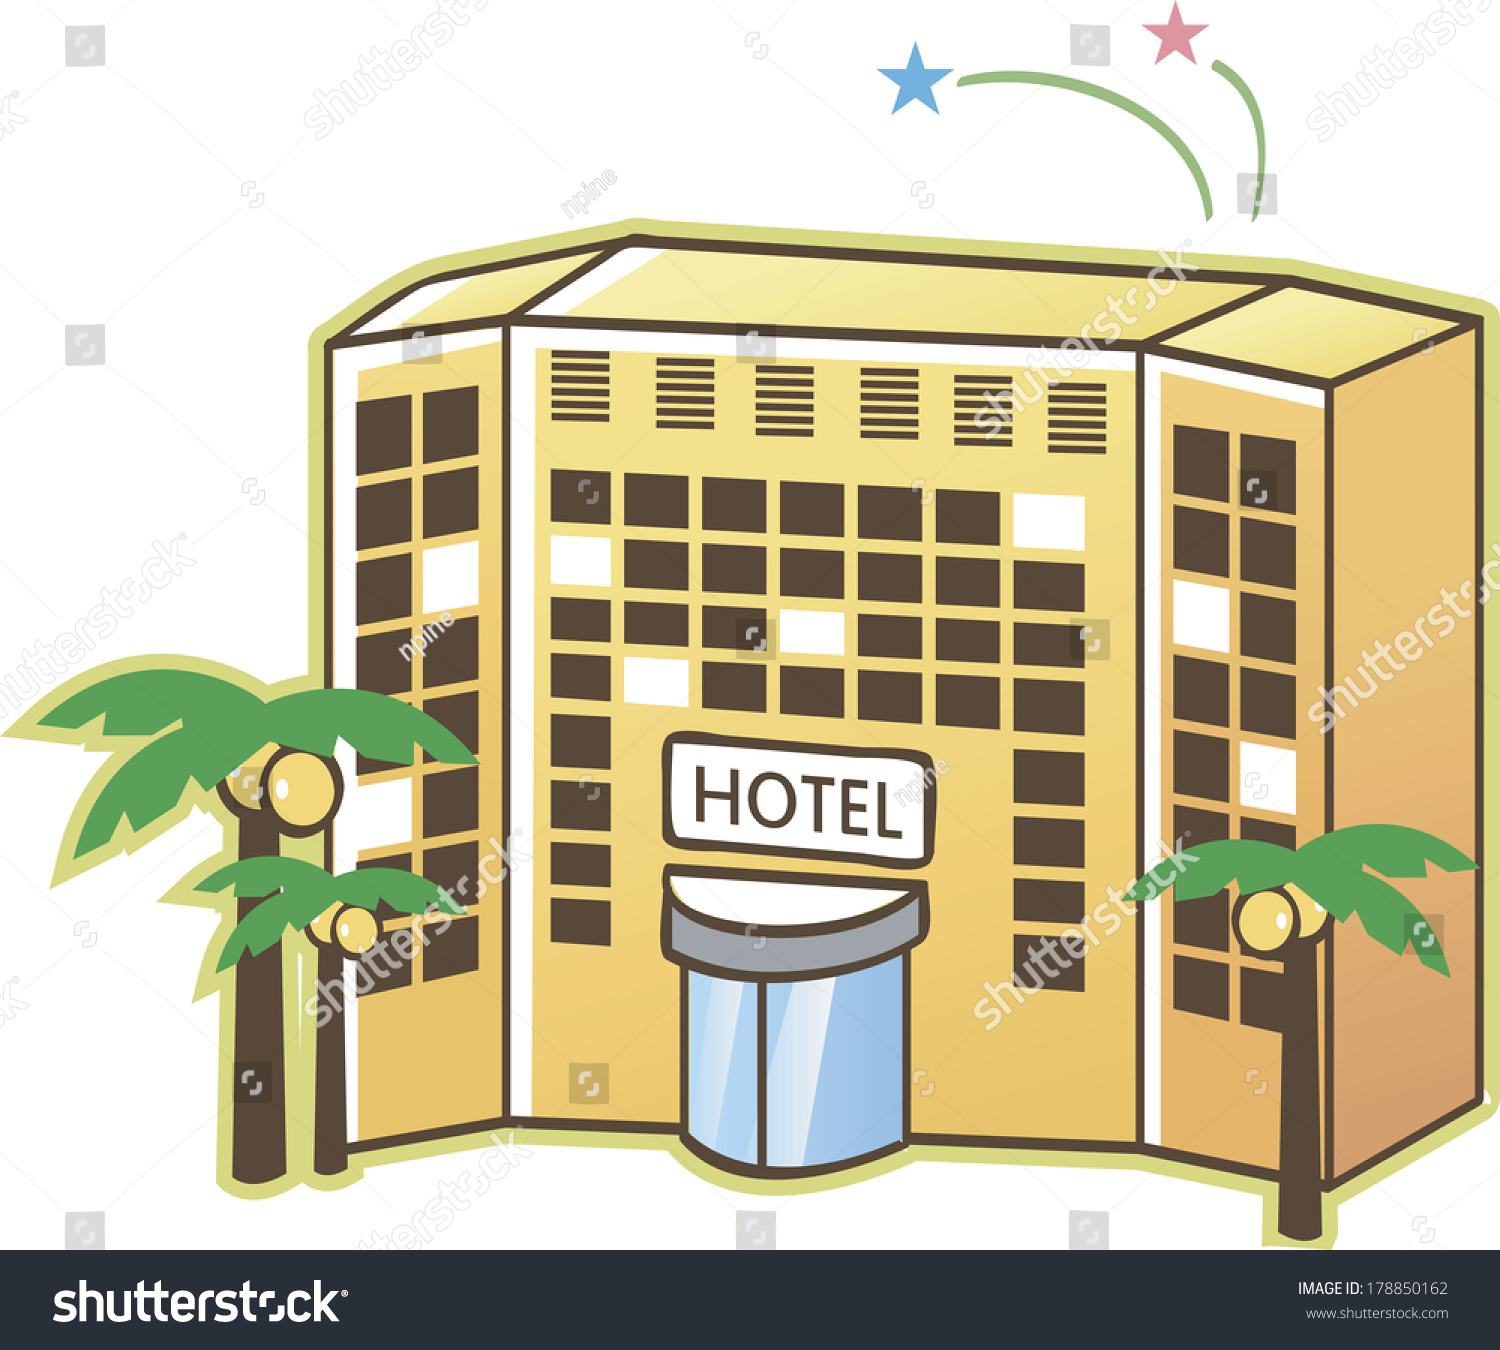 clipart hotel images - photo #46